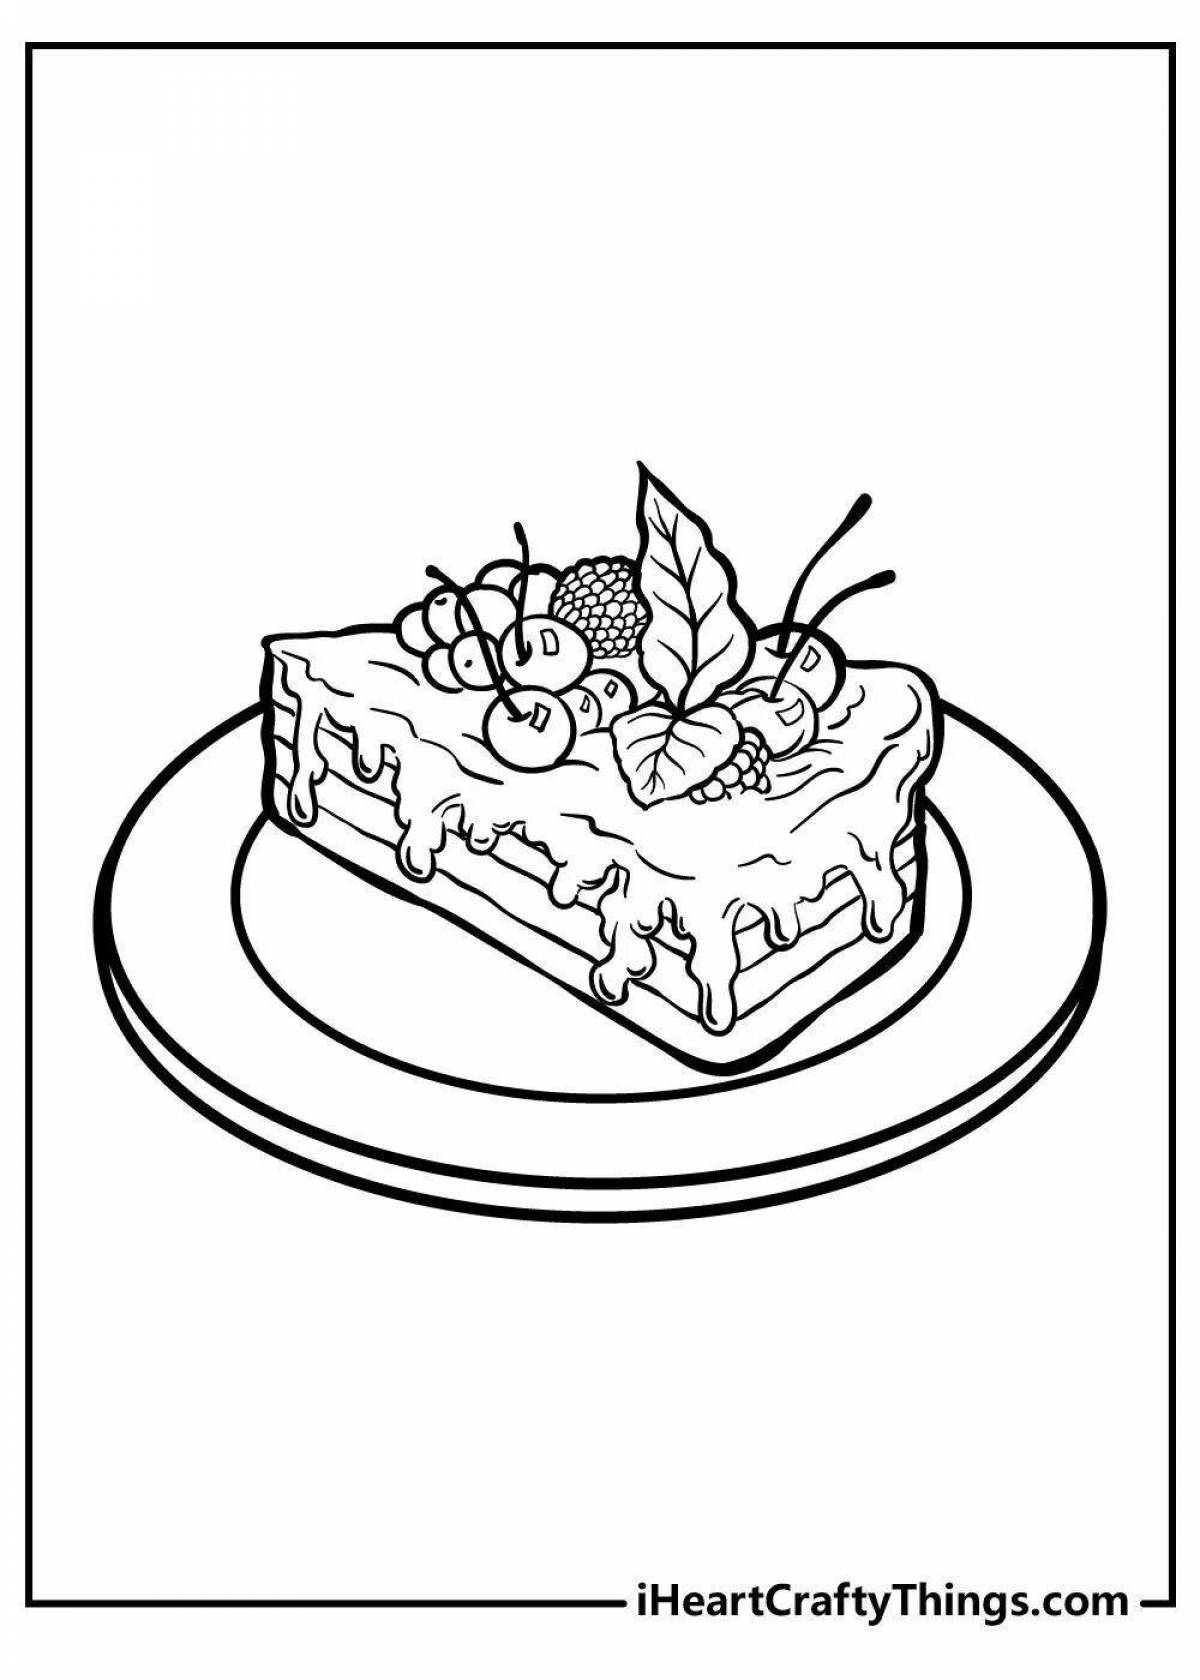 Fairy cake coloring book for girls